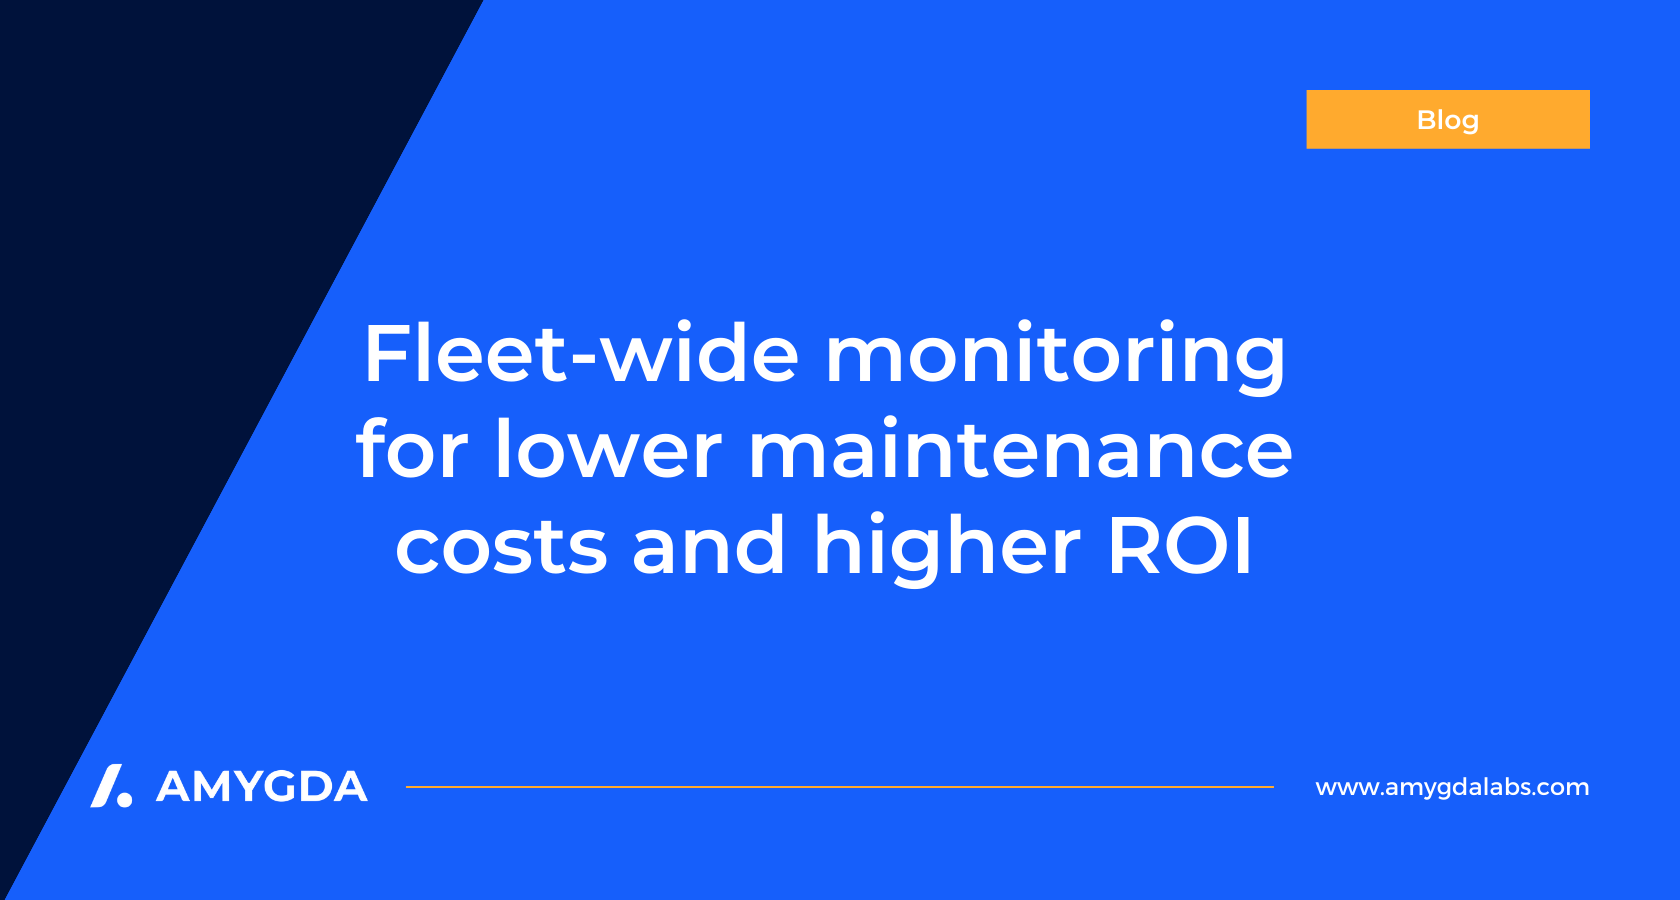 Fleet-wide monitoring for lower maintenance costs